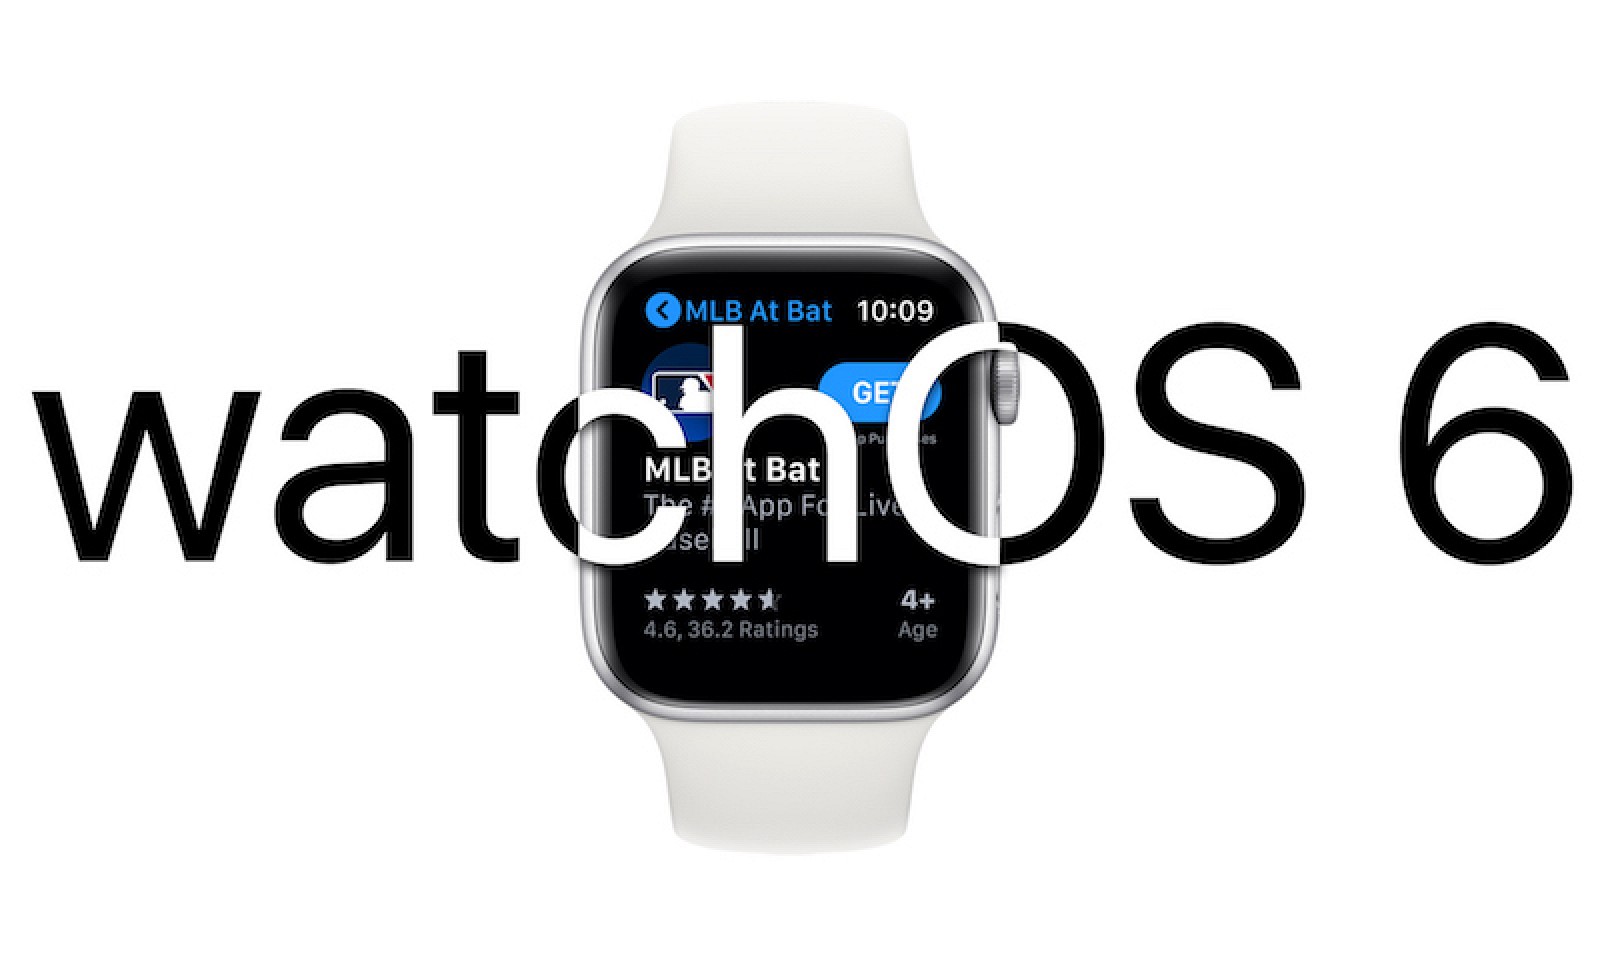 Apple Providing watchOS 6 Beta to Select AppleSeed Members